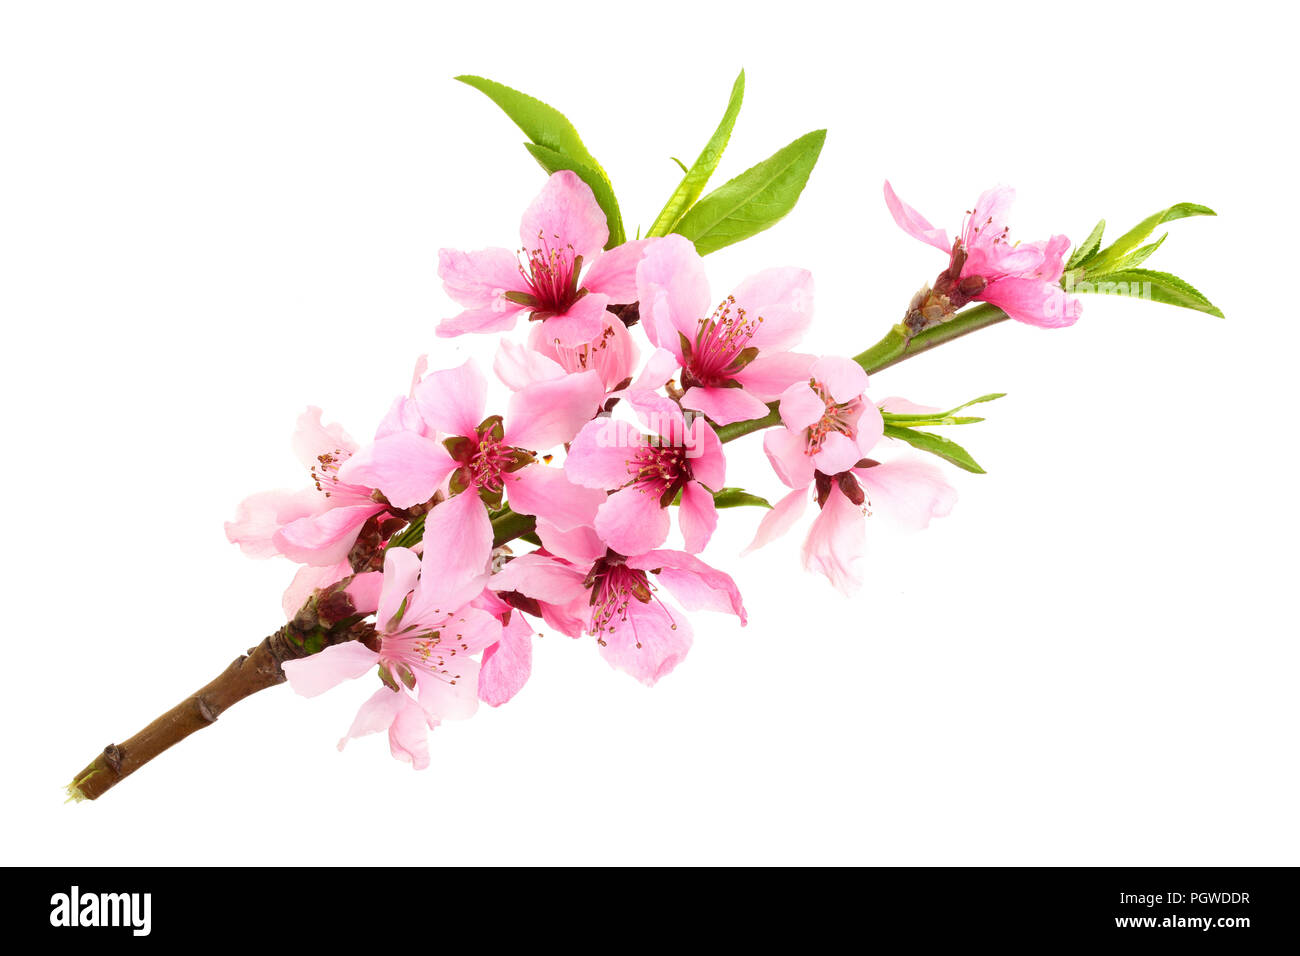 Single cherry blossom Cut Out Stock Images & Pictures - Alamy